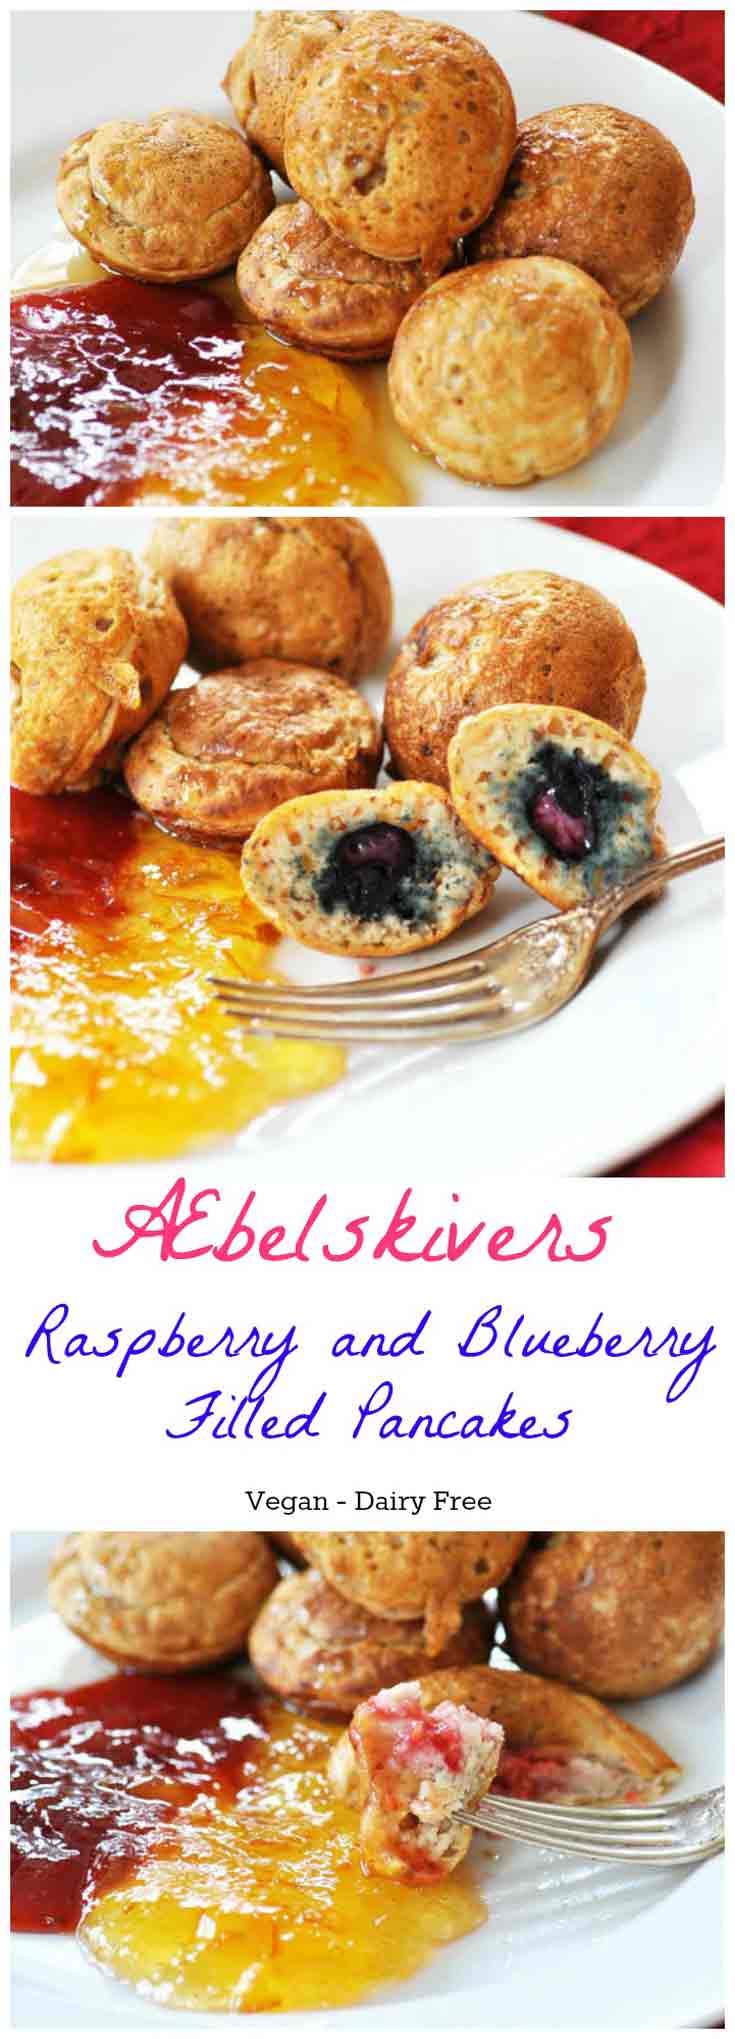 Æbelskivers - Filled Pancake Balls! This Danish filled pancake recipe is vegan and dairy-free. Light, fluffy, and delicious. Fill them with fruit, chocolate, nuts, or whatever you like. www.veganosity.com 